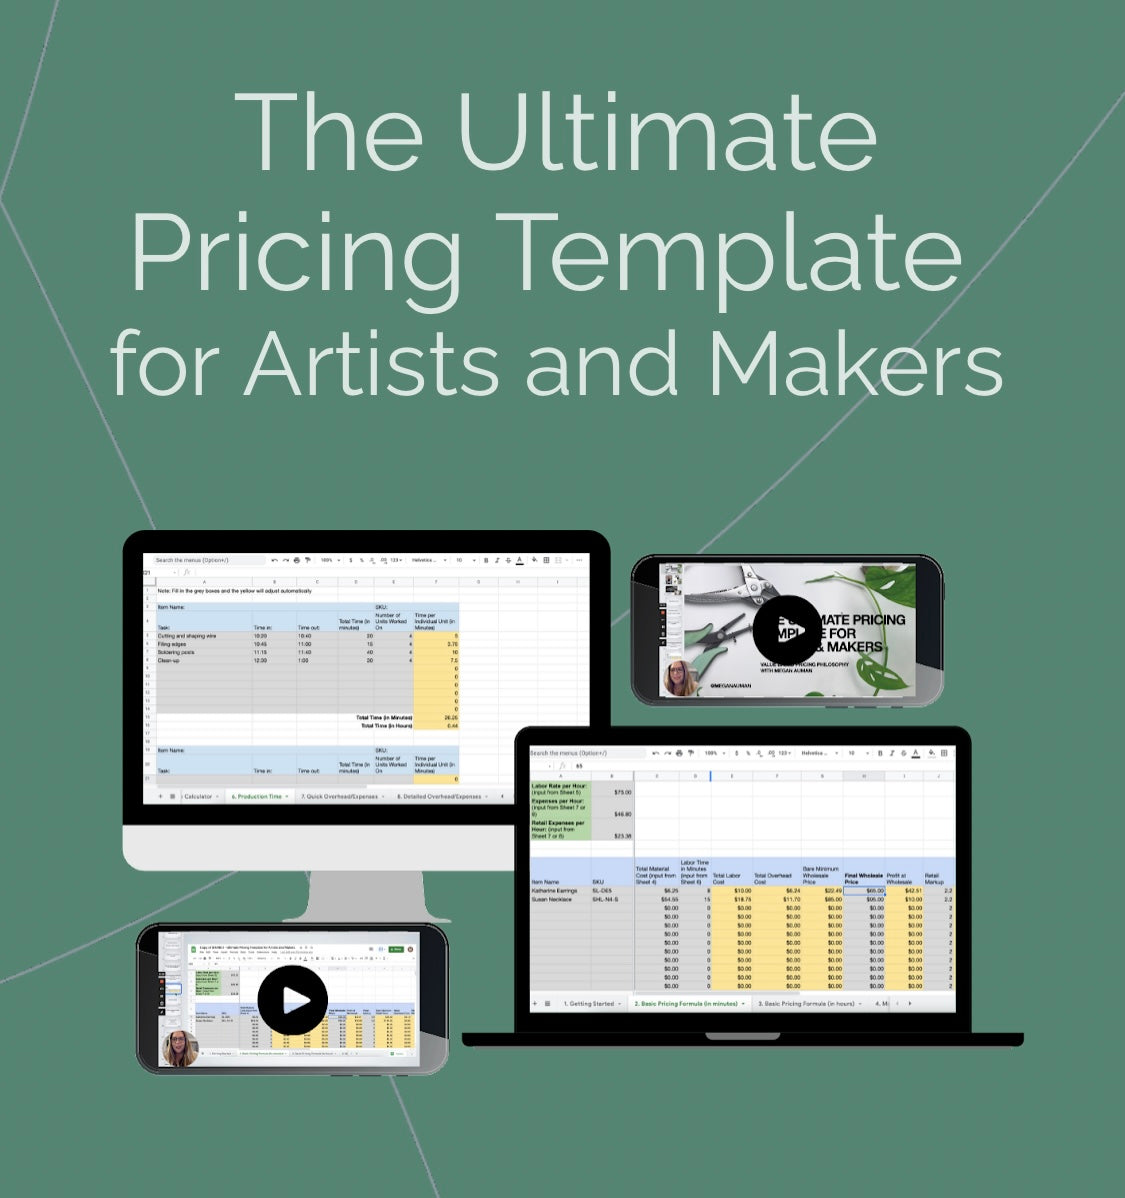 The Ultimate Pricing Template for Artists and Makers